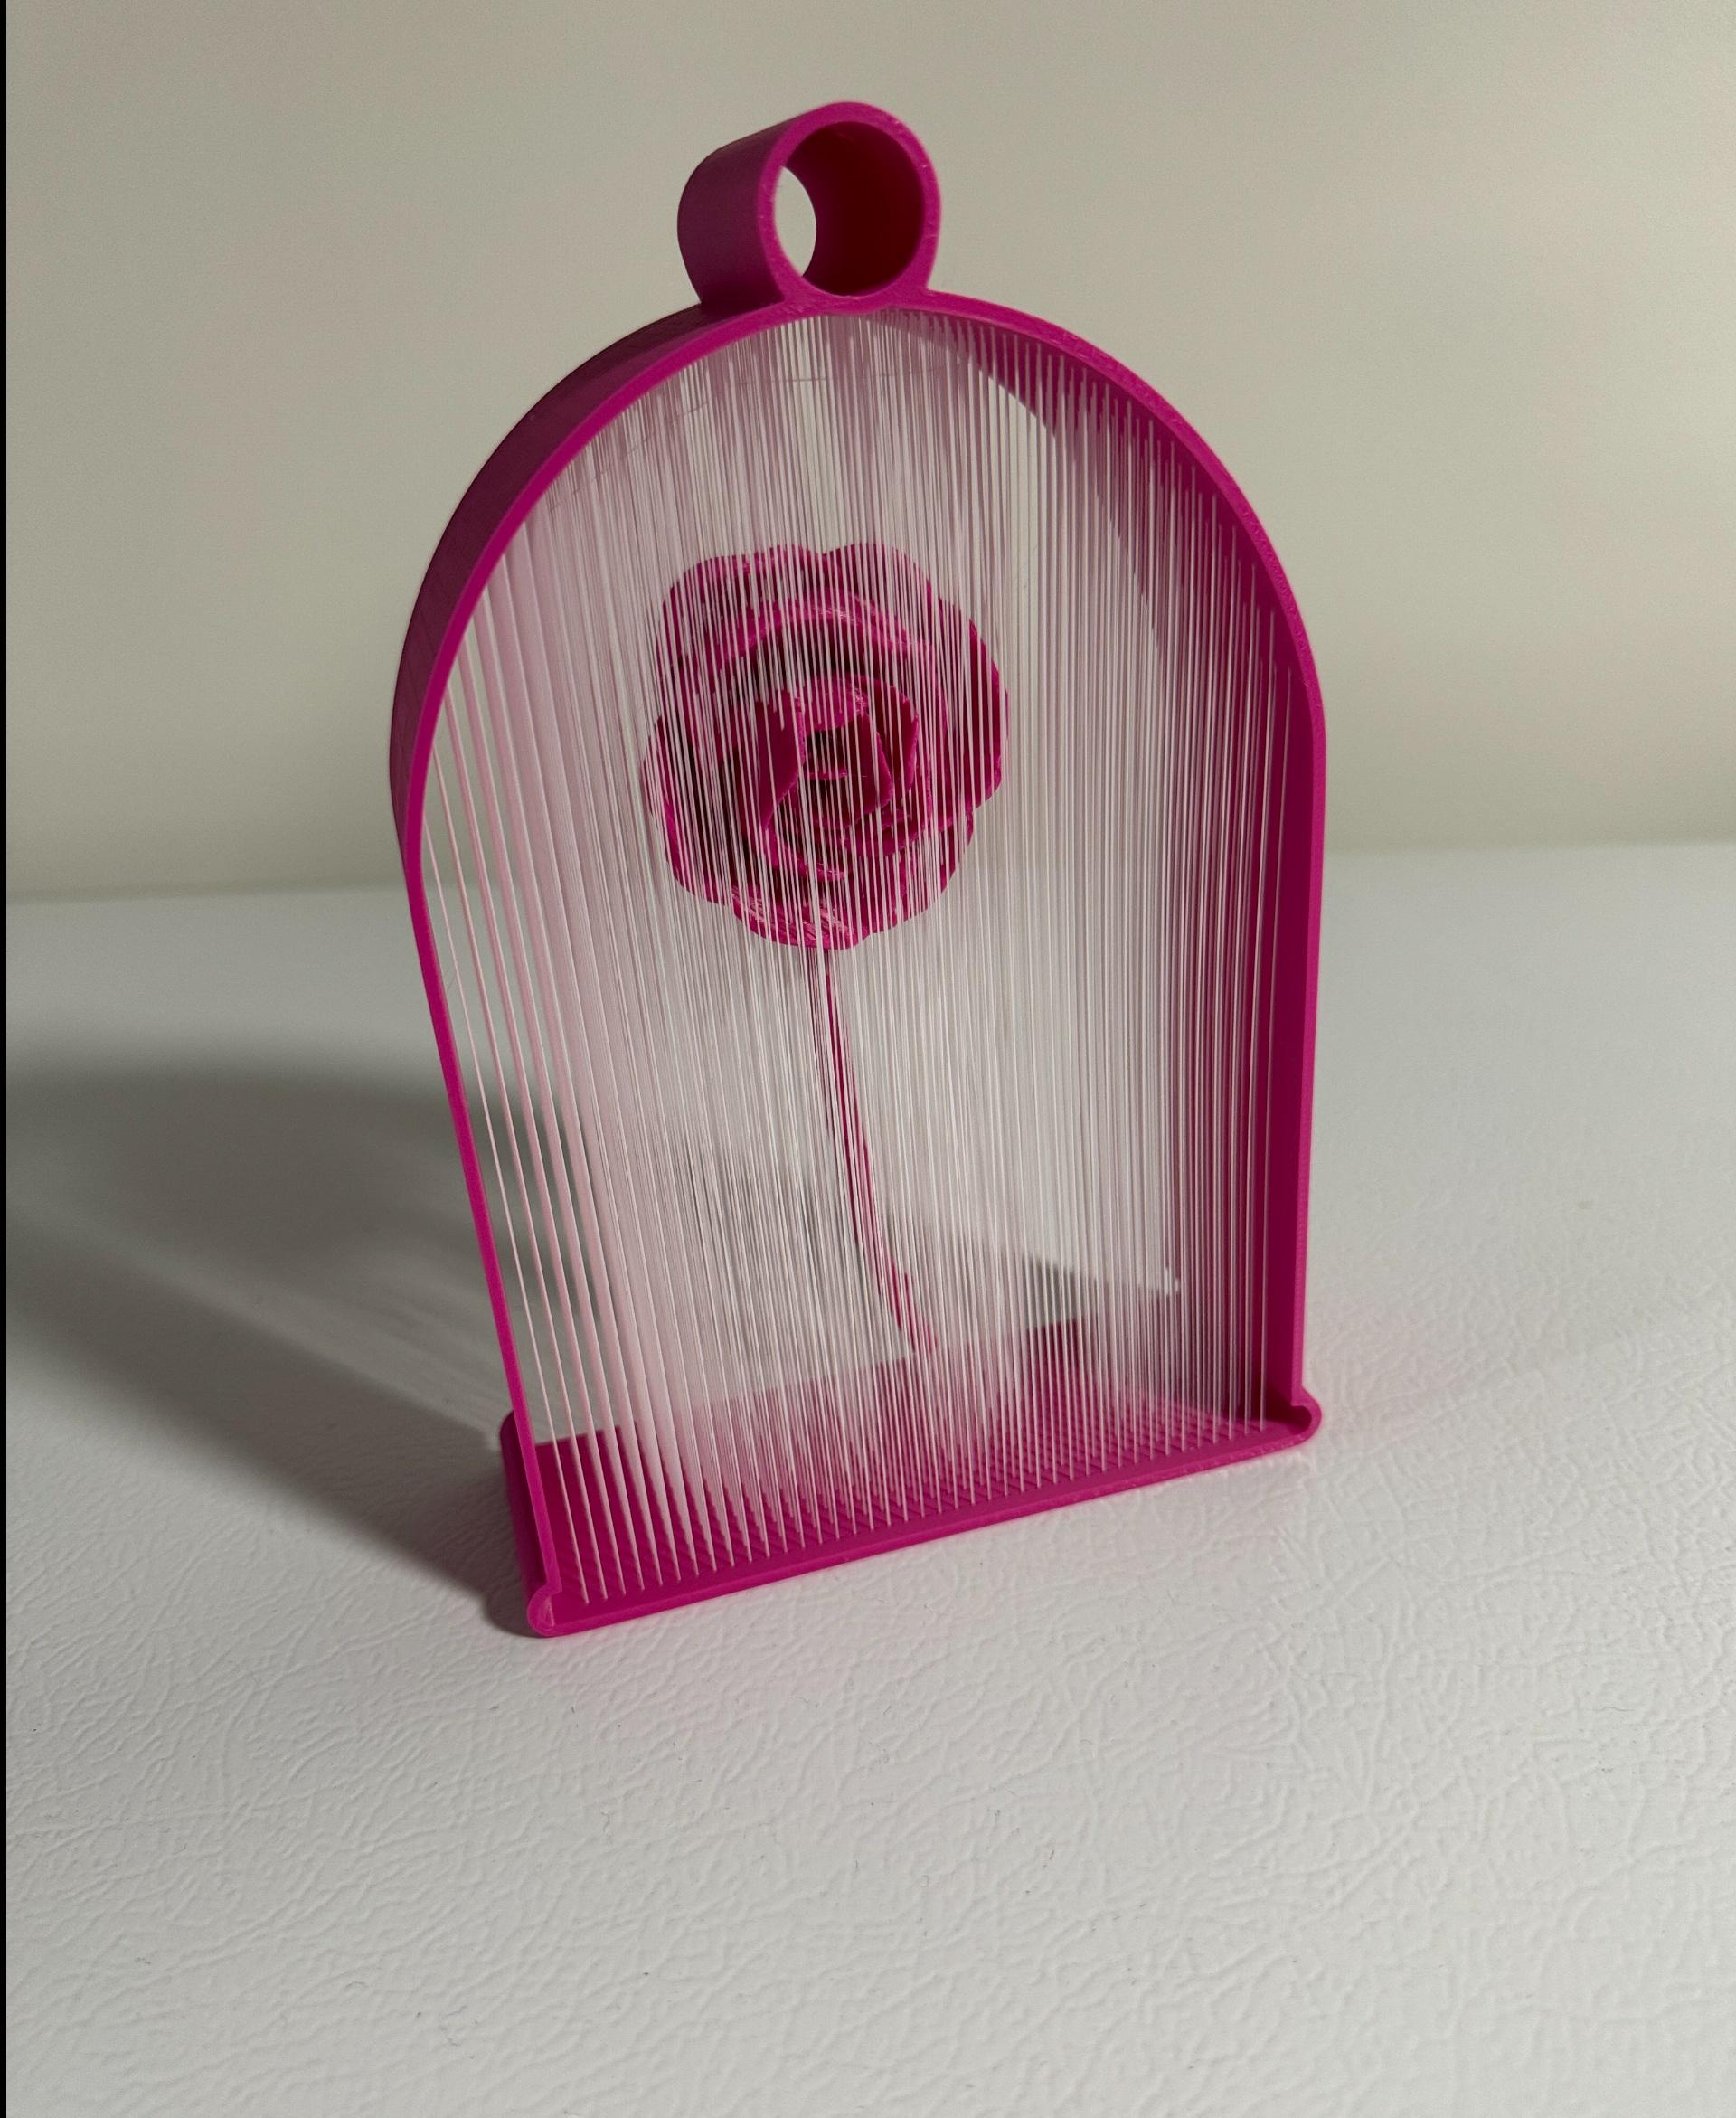 Suspended Rose String Art - Magenta and white.
A couple of thread breaks on the initial layer, but the rest came out great. - 3d model